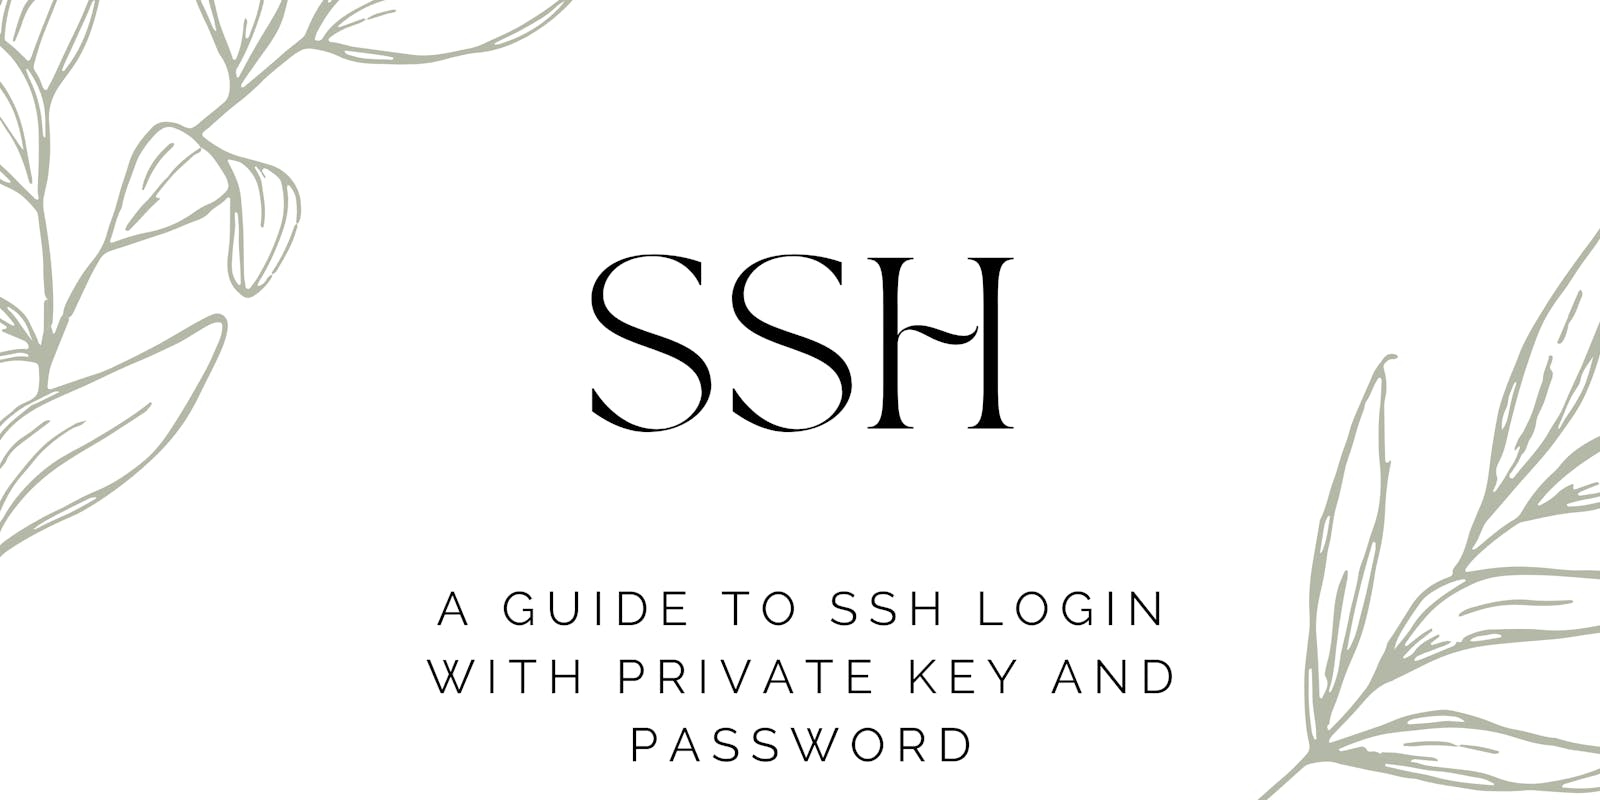 Securely Accessing Your Server: A Guide to SSH Login with Private Key and Password